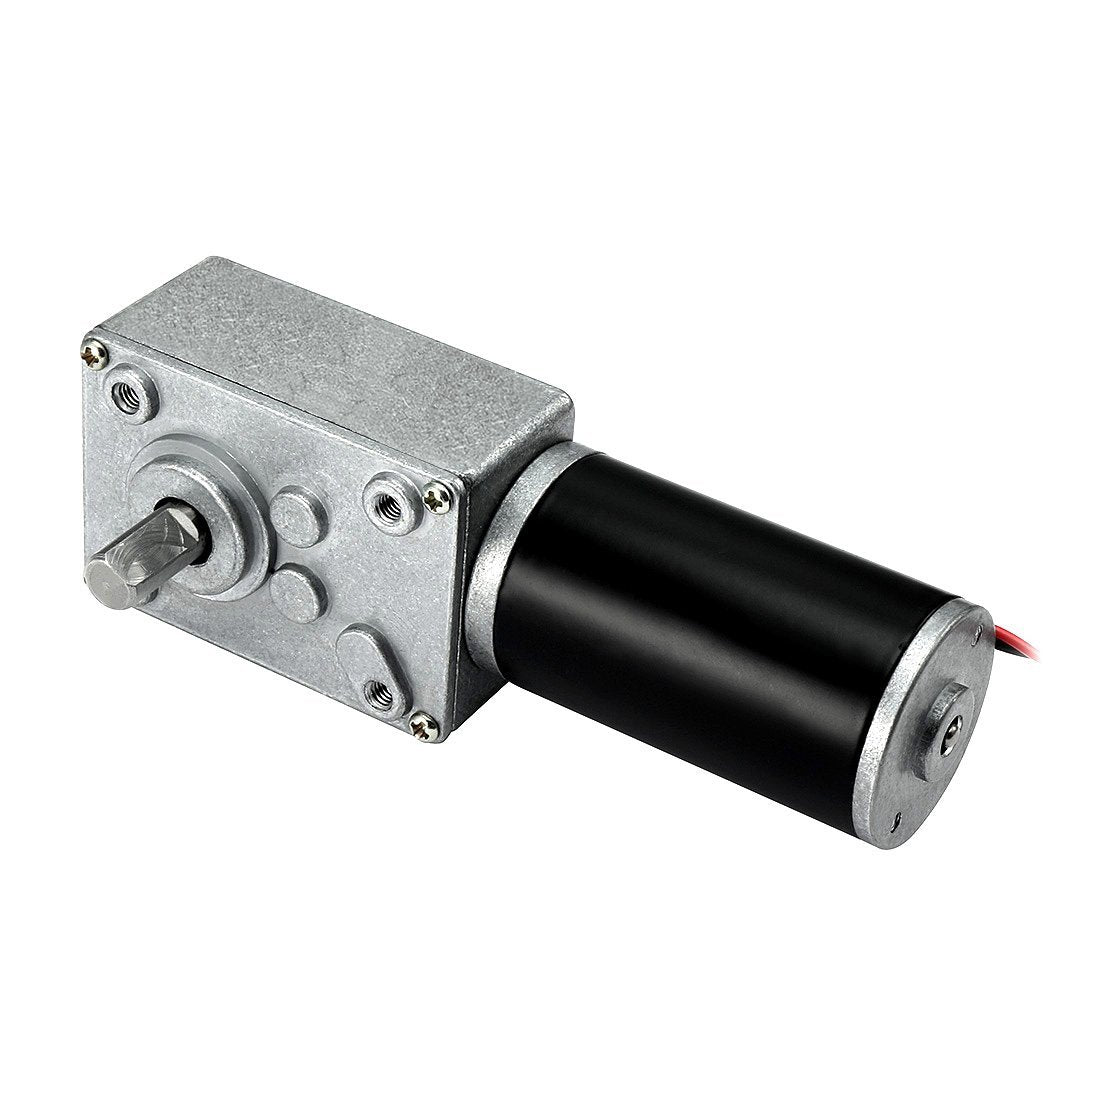 uxcell Uxcell DC 12V 220RPM High Torque Electric Power Speed Reduce Turbine Worm Gear Box Motor